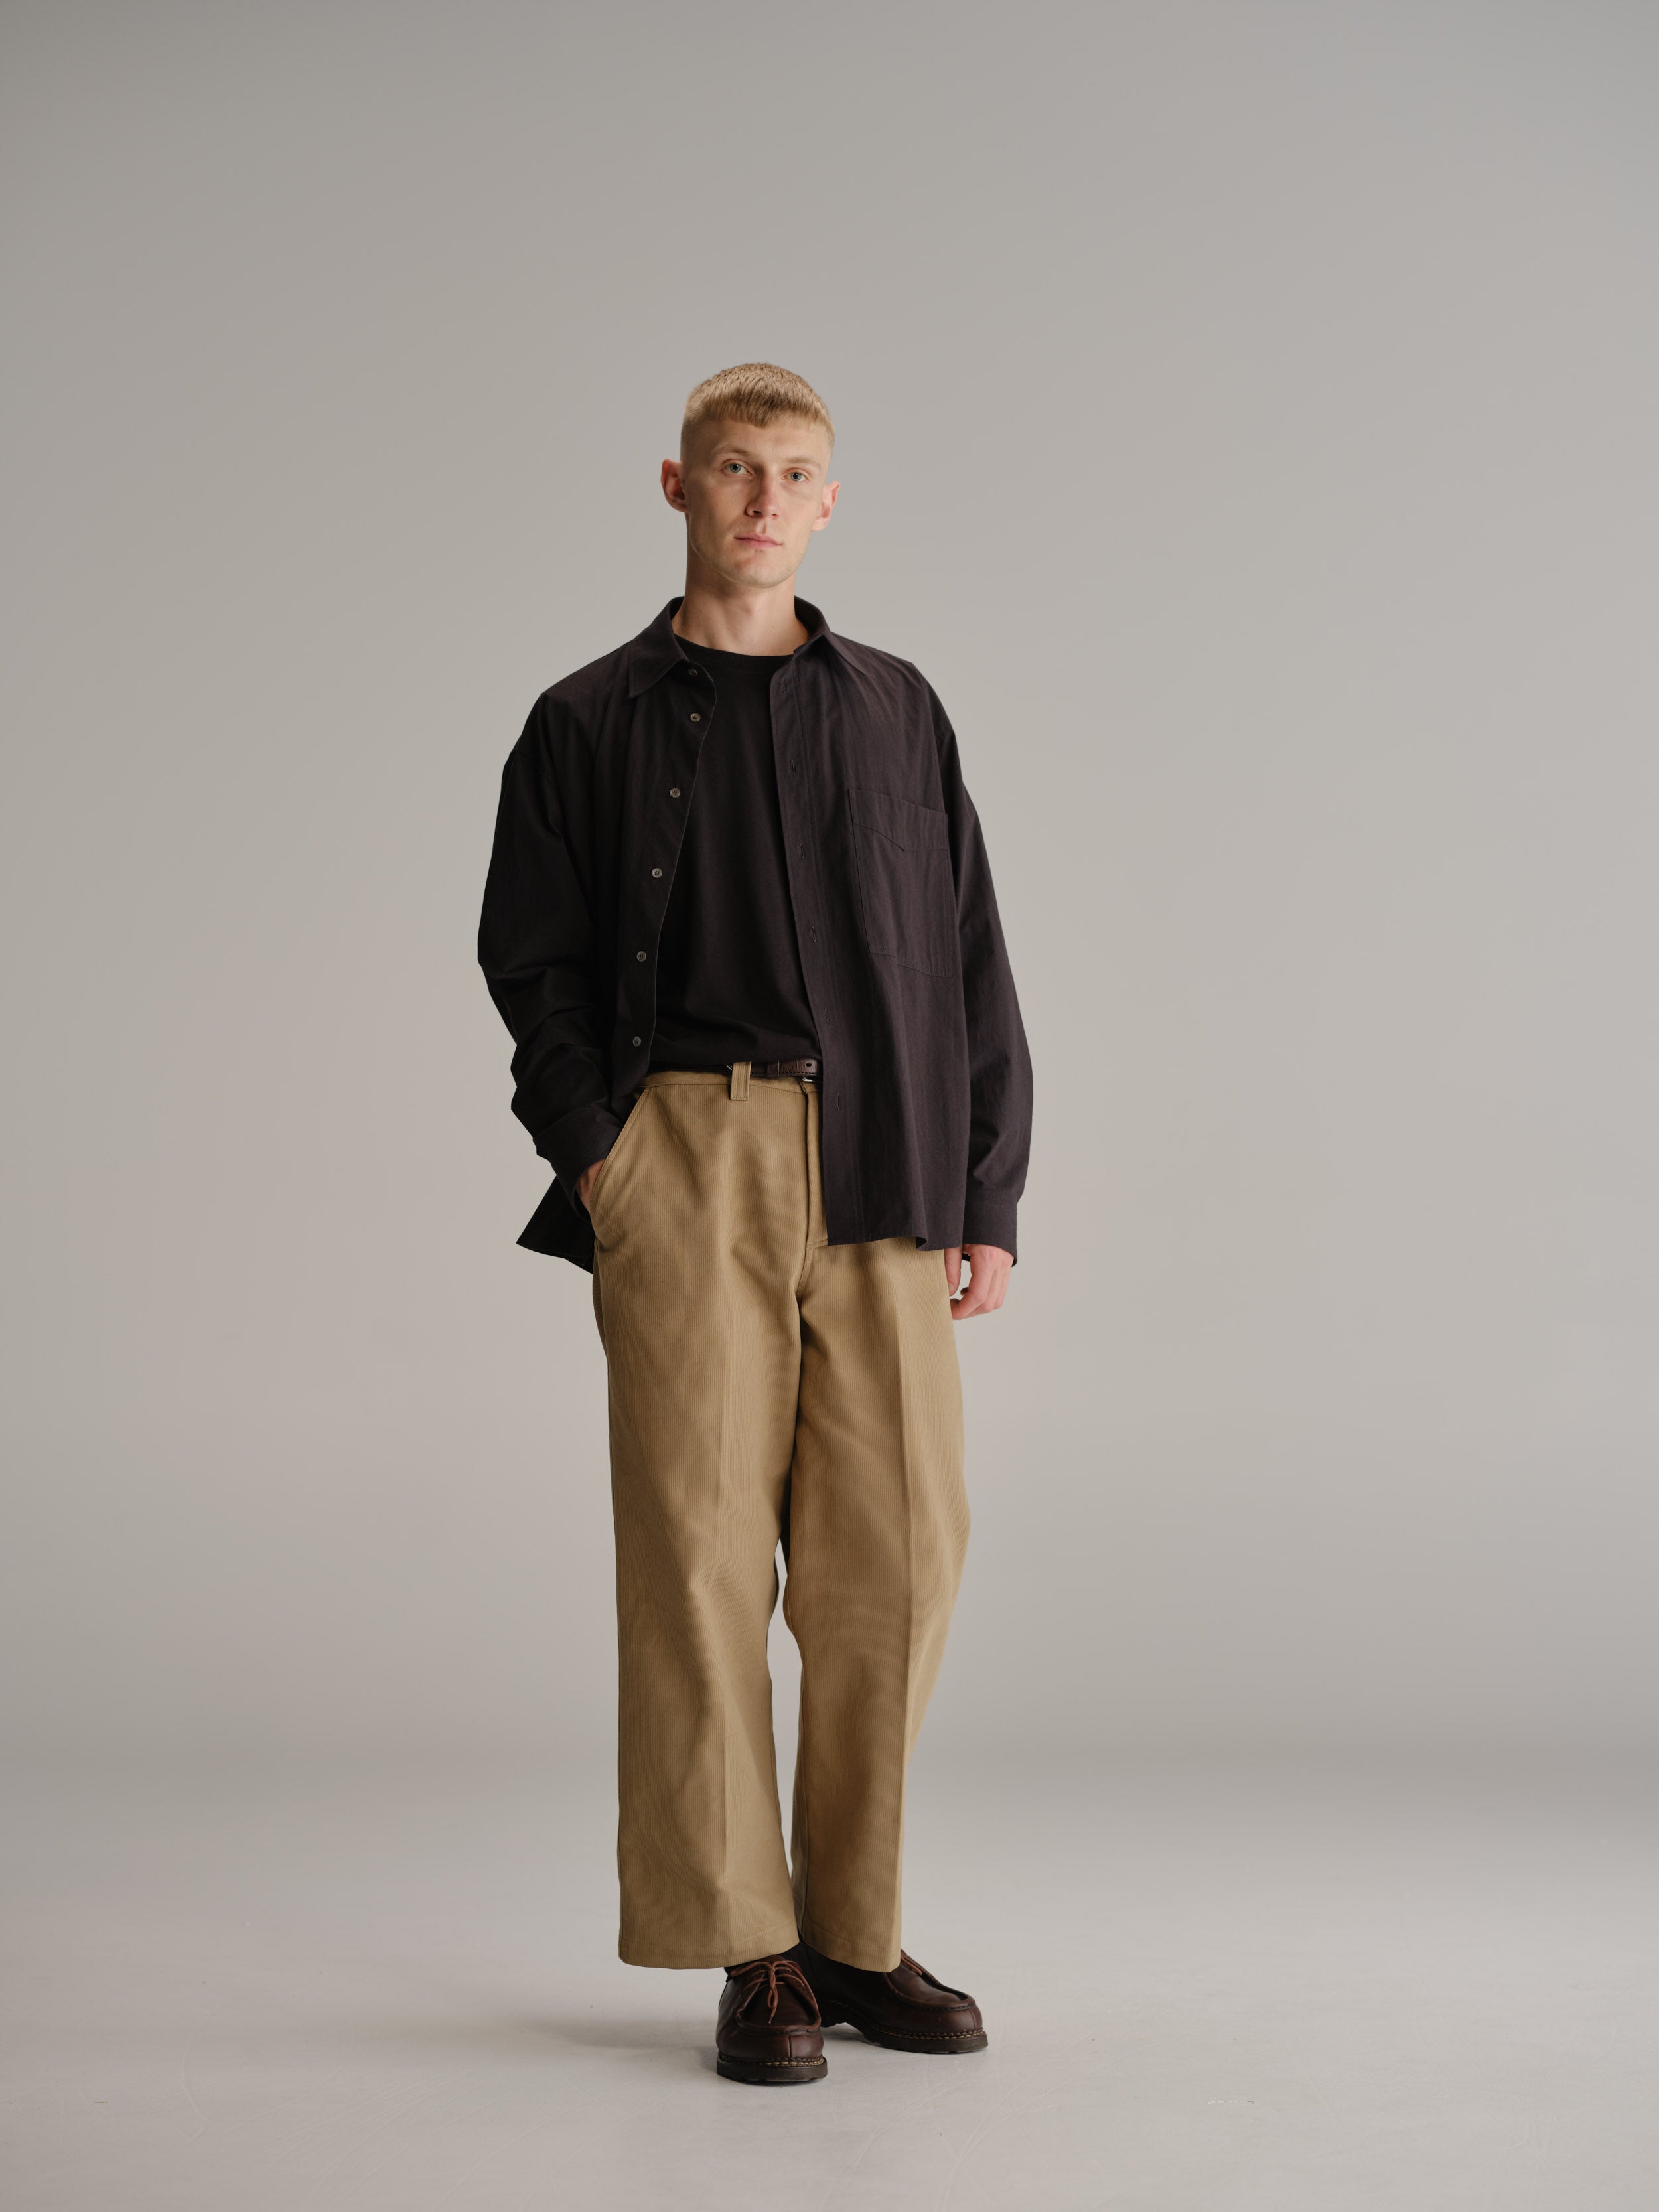 Front view of man standing in white studio with hand in pocket wearing black shirt, tucked in black t-shirt and fawn pant.